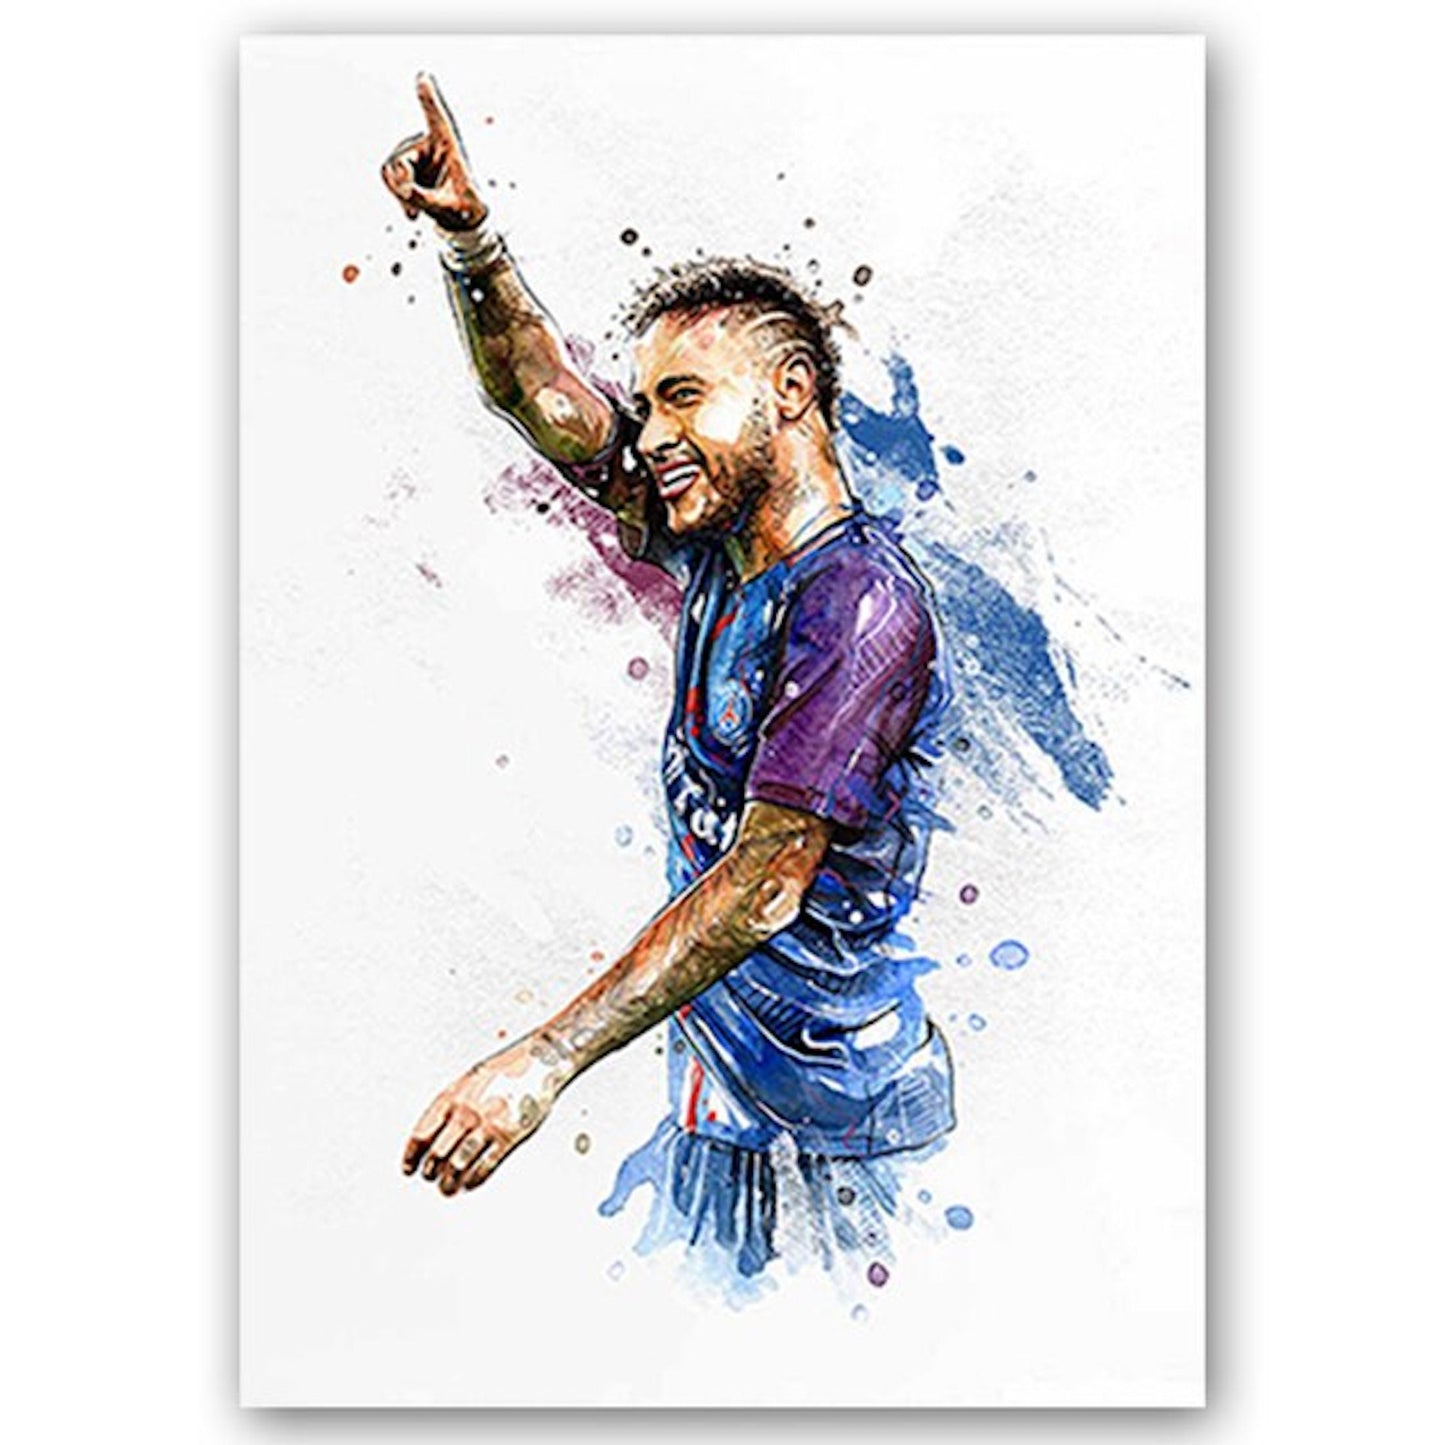 Poster soccer player goal jubilation Lionel Messi and Christiano Ronaldo as a decorative print without a frame